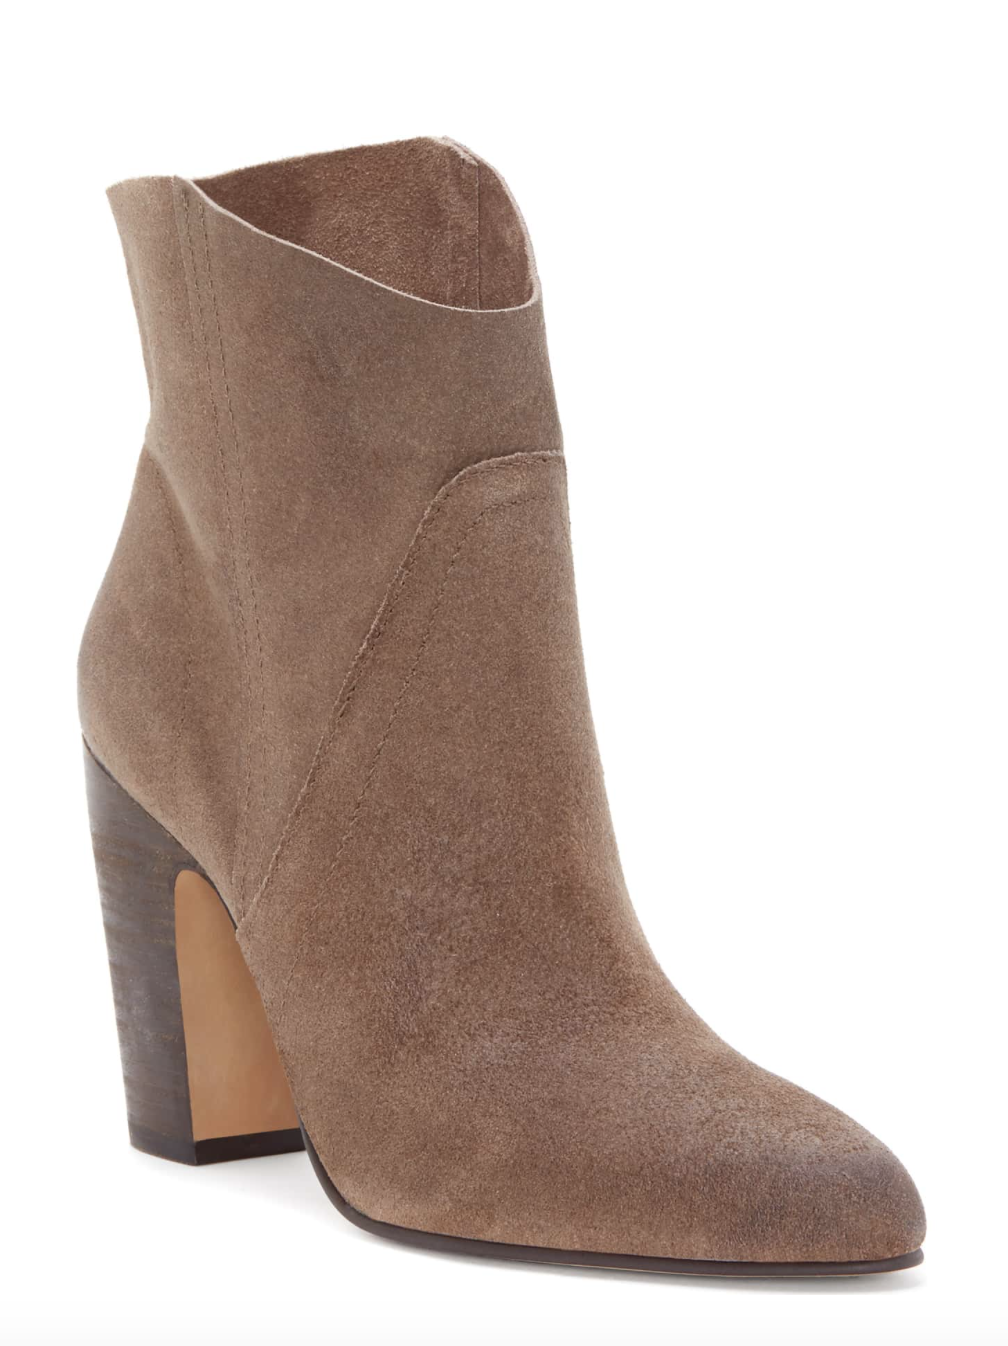 Vince Camuto Western Bootie - The style is so flattering and elongates your legs! Comes in several colors & 50% off!